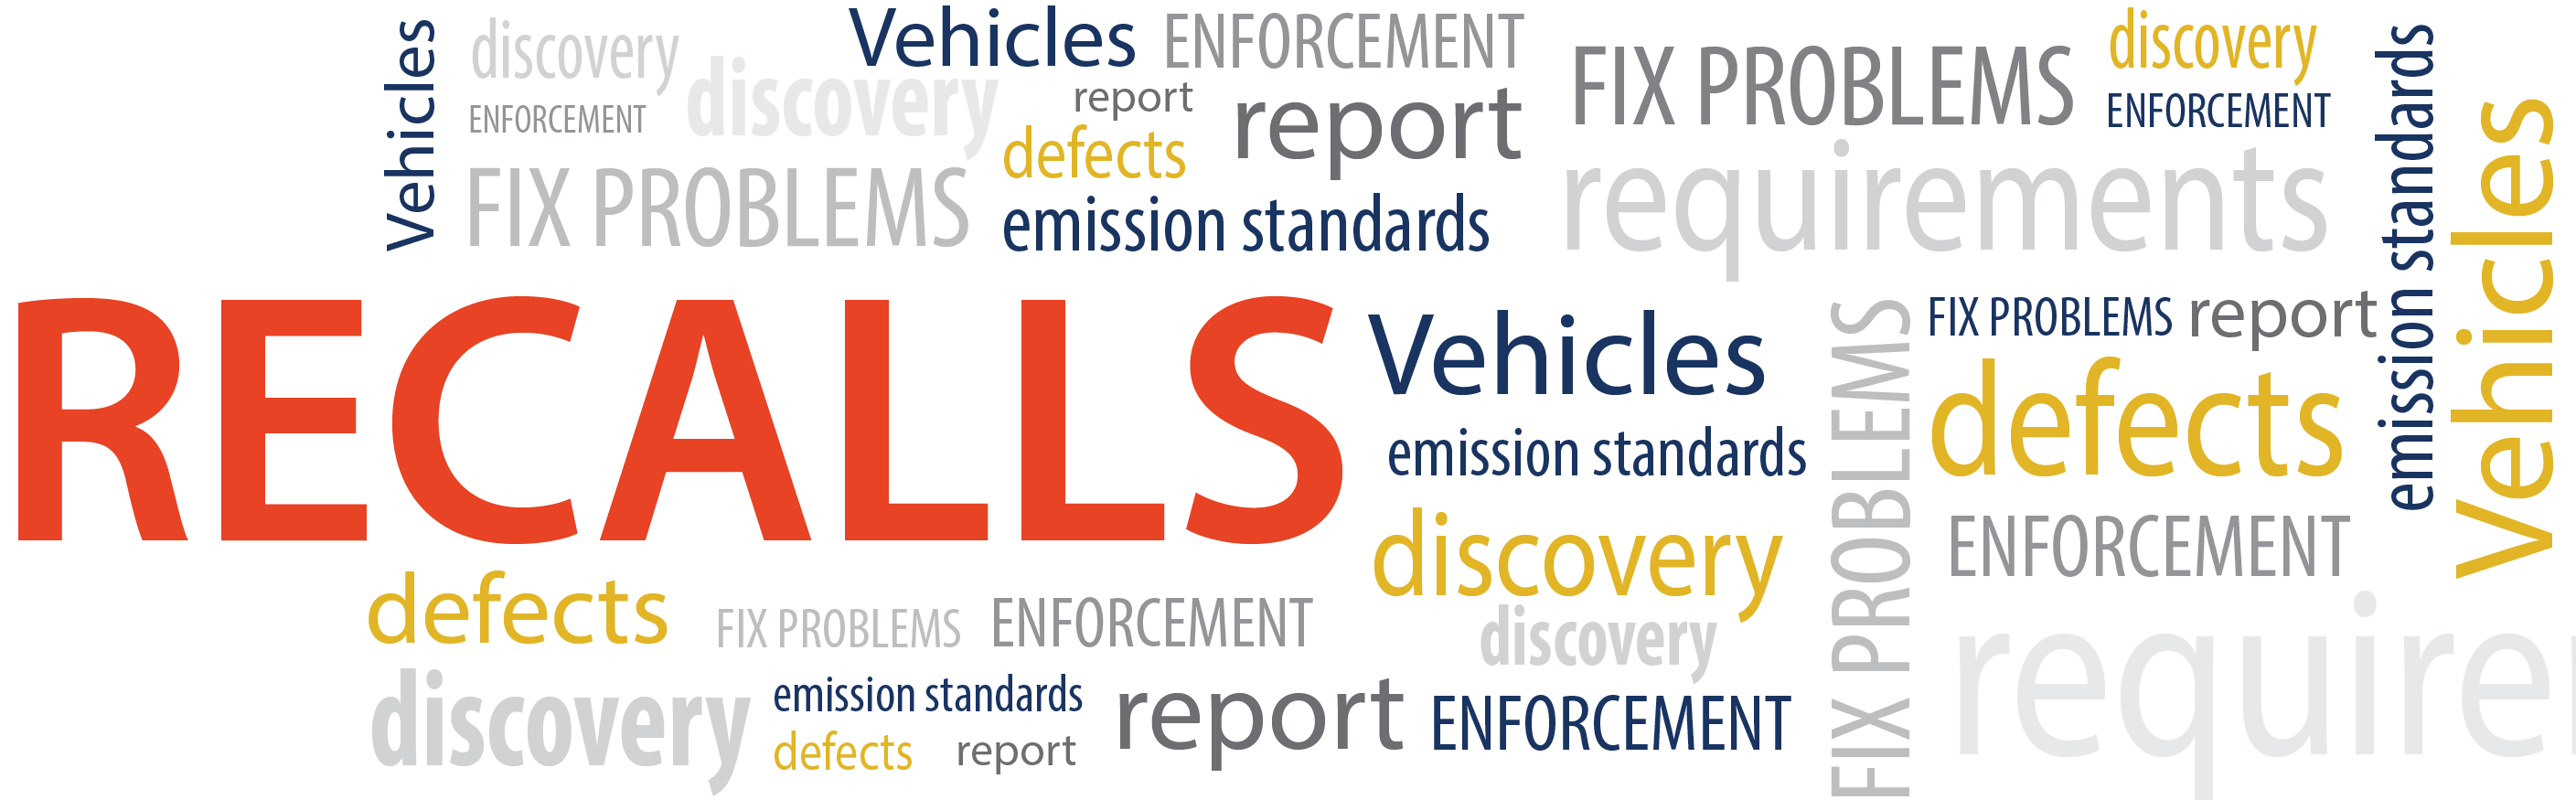 A word cloud with words related to Recalls. A link to https://www.epa.gov/recalls